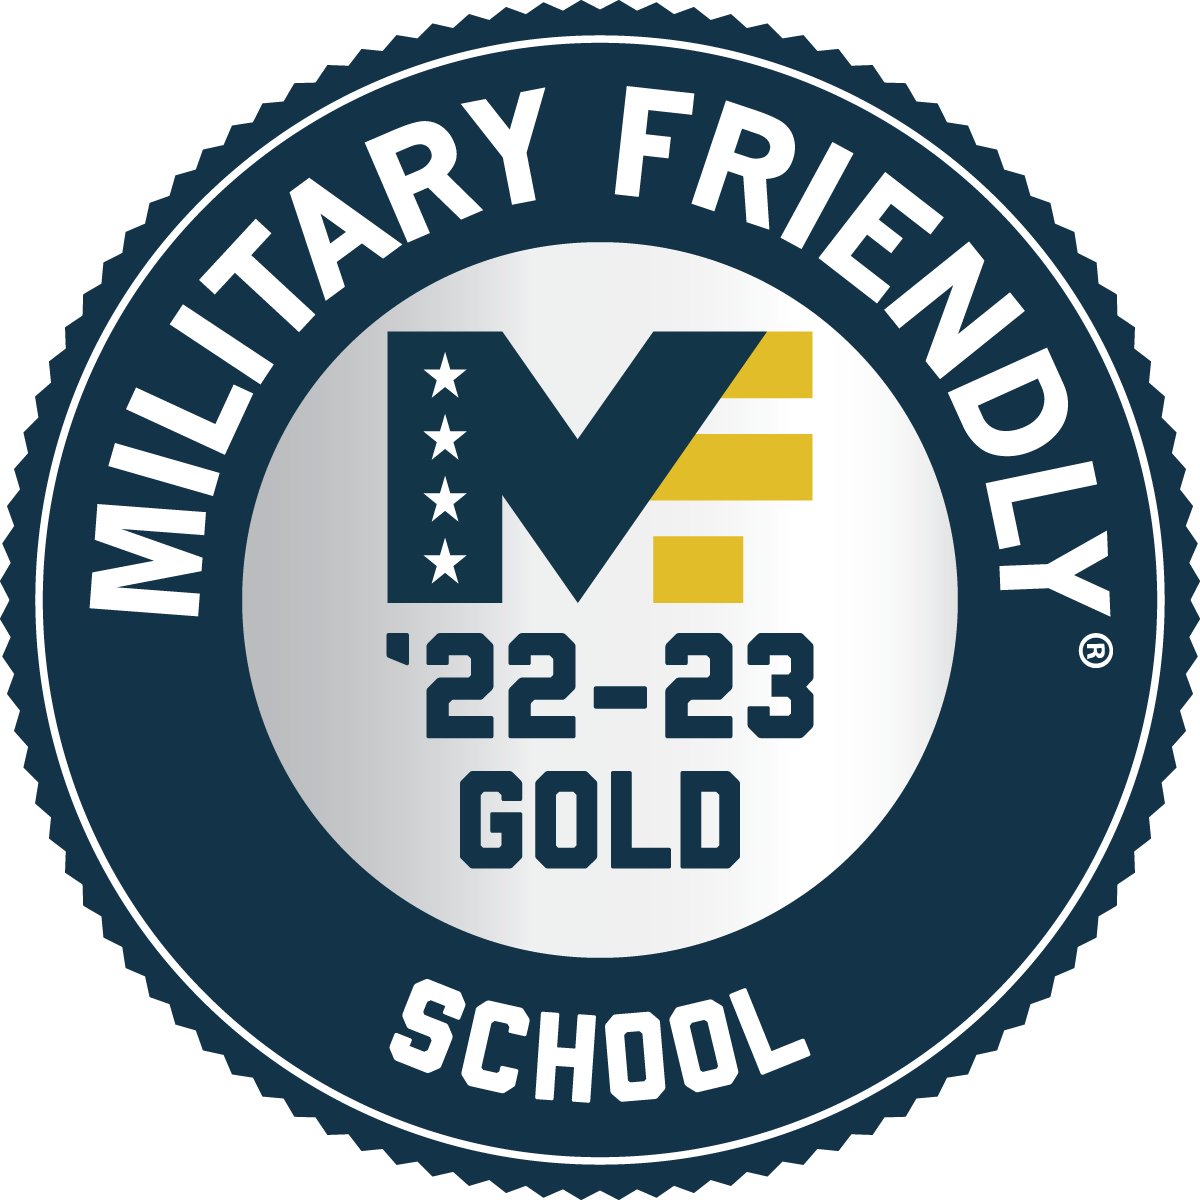 Methodist University has earned a “gold-level” ranking while being designated a Military Friendly university for the 2022-23 school year, the university announced earlier this month.